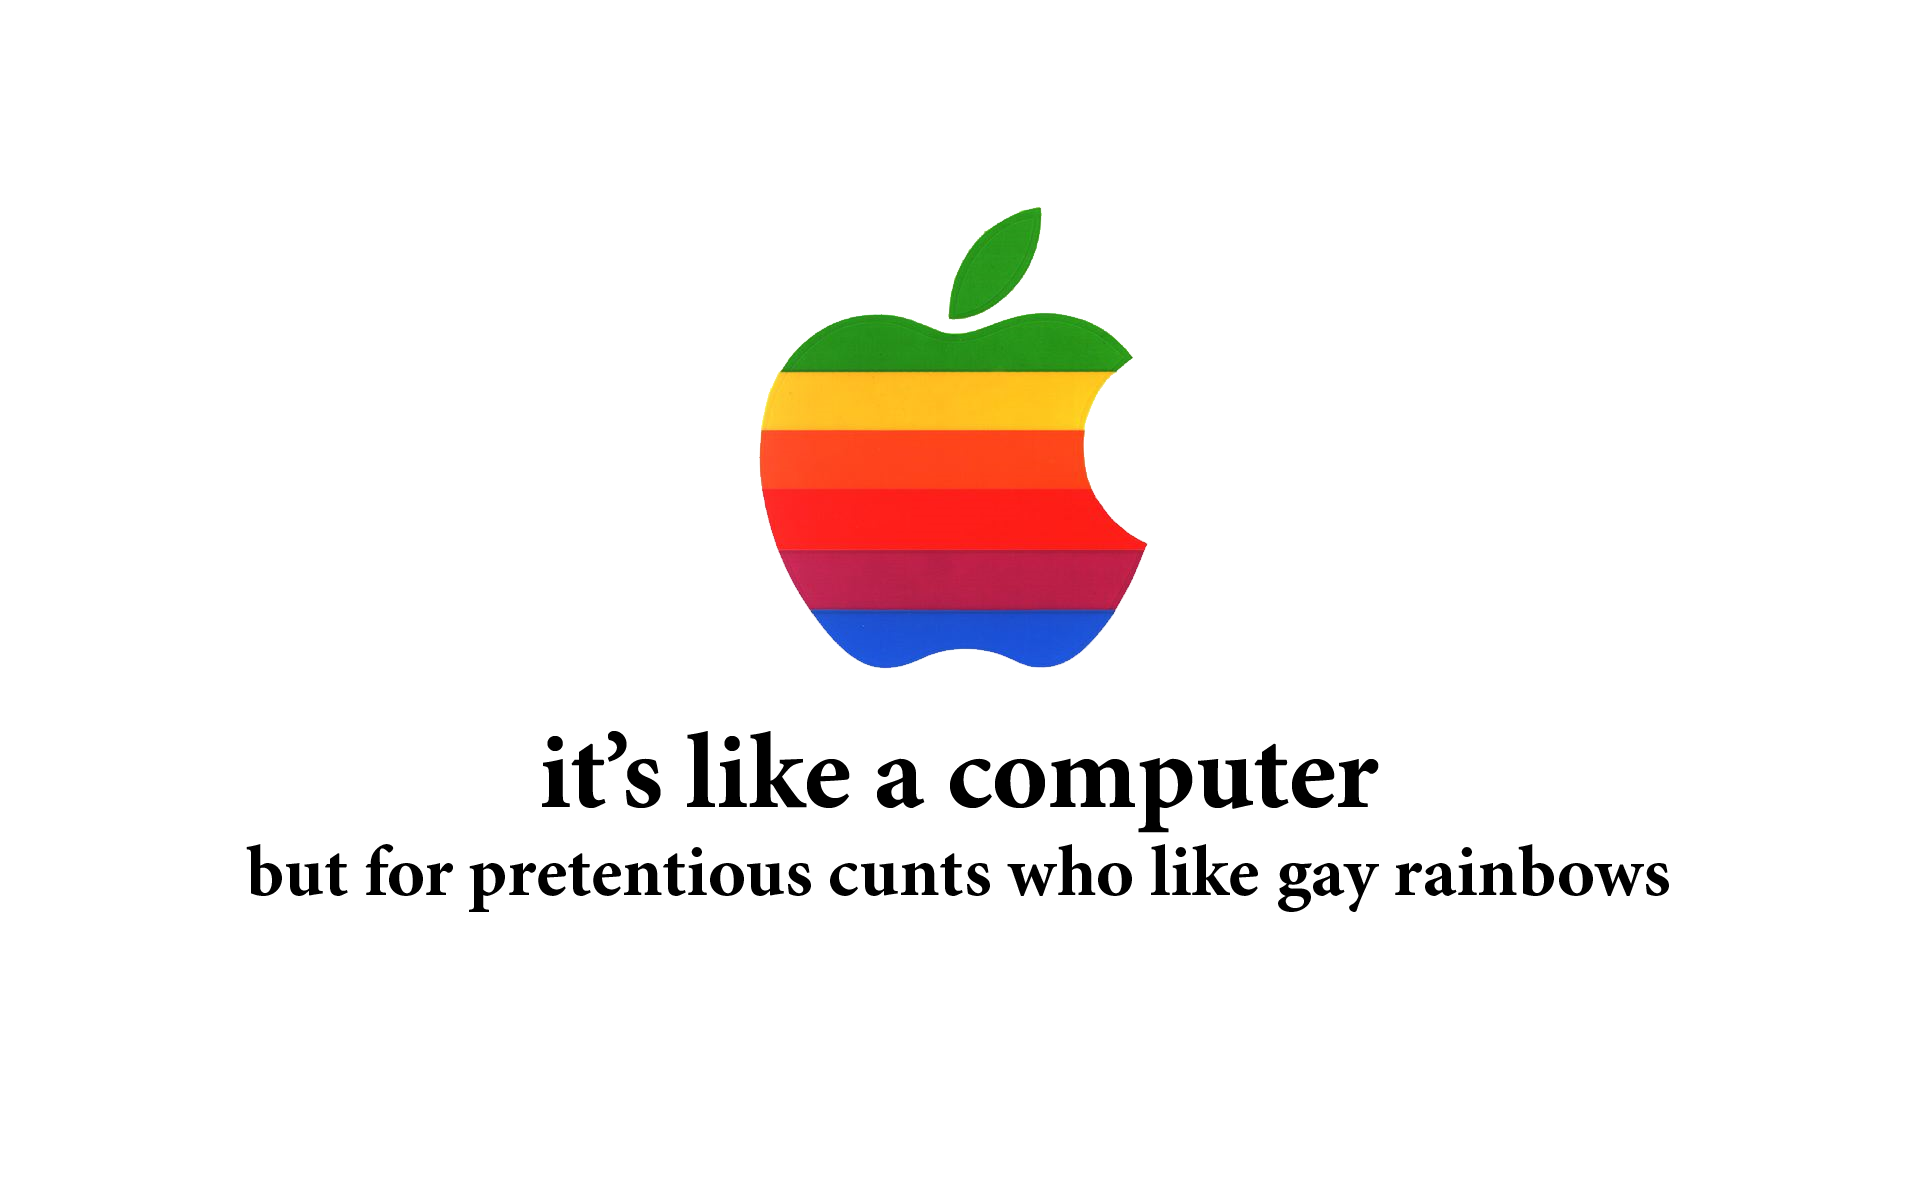 apple_is_like_computer.png